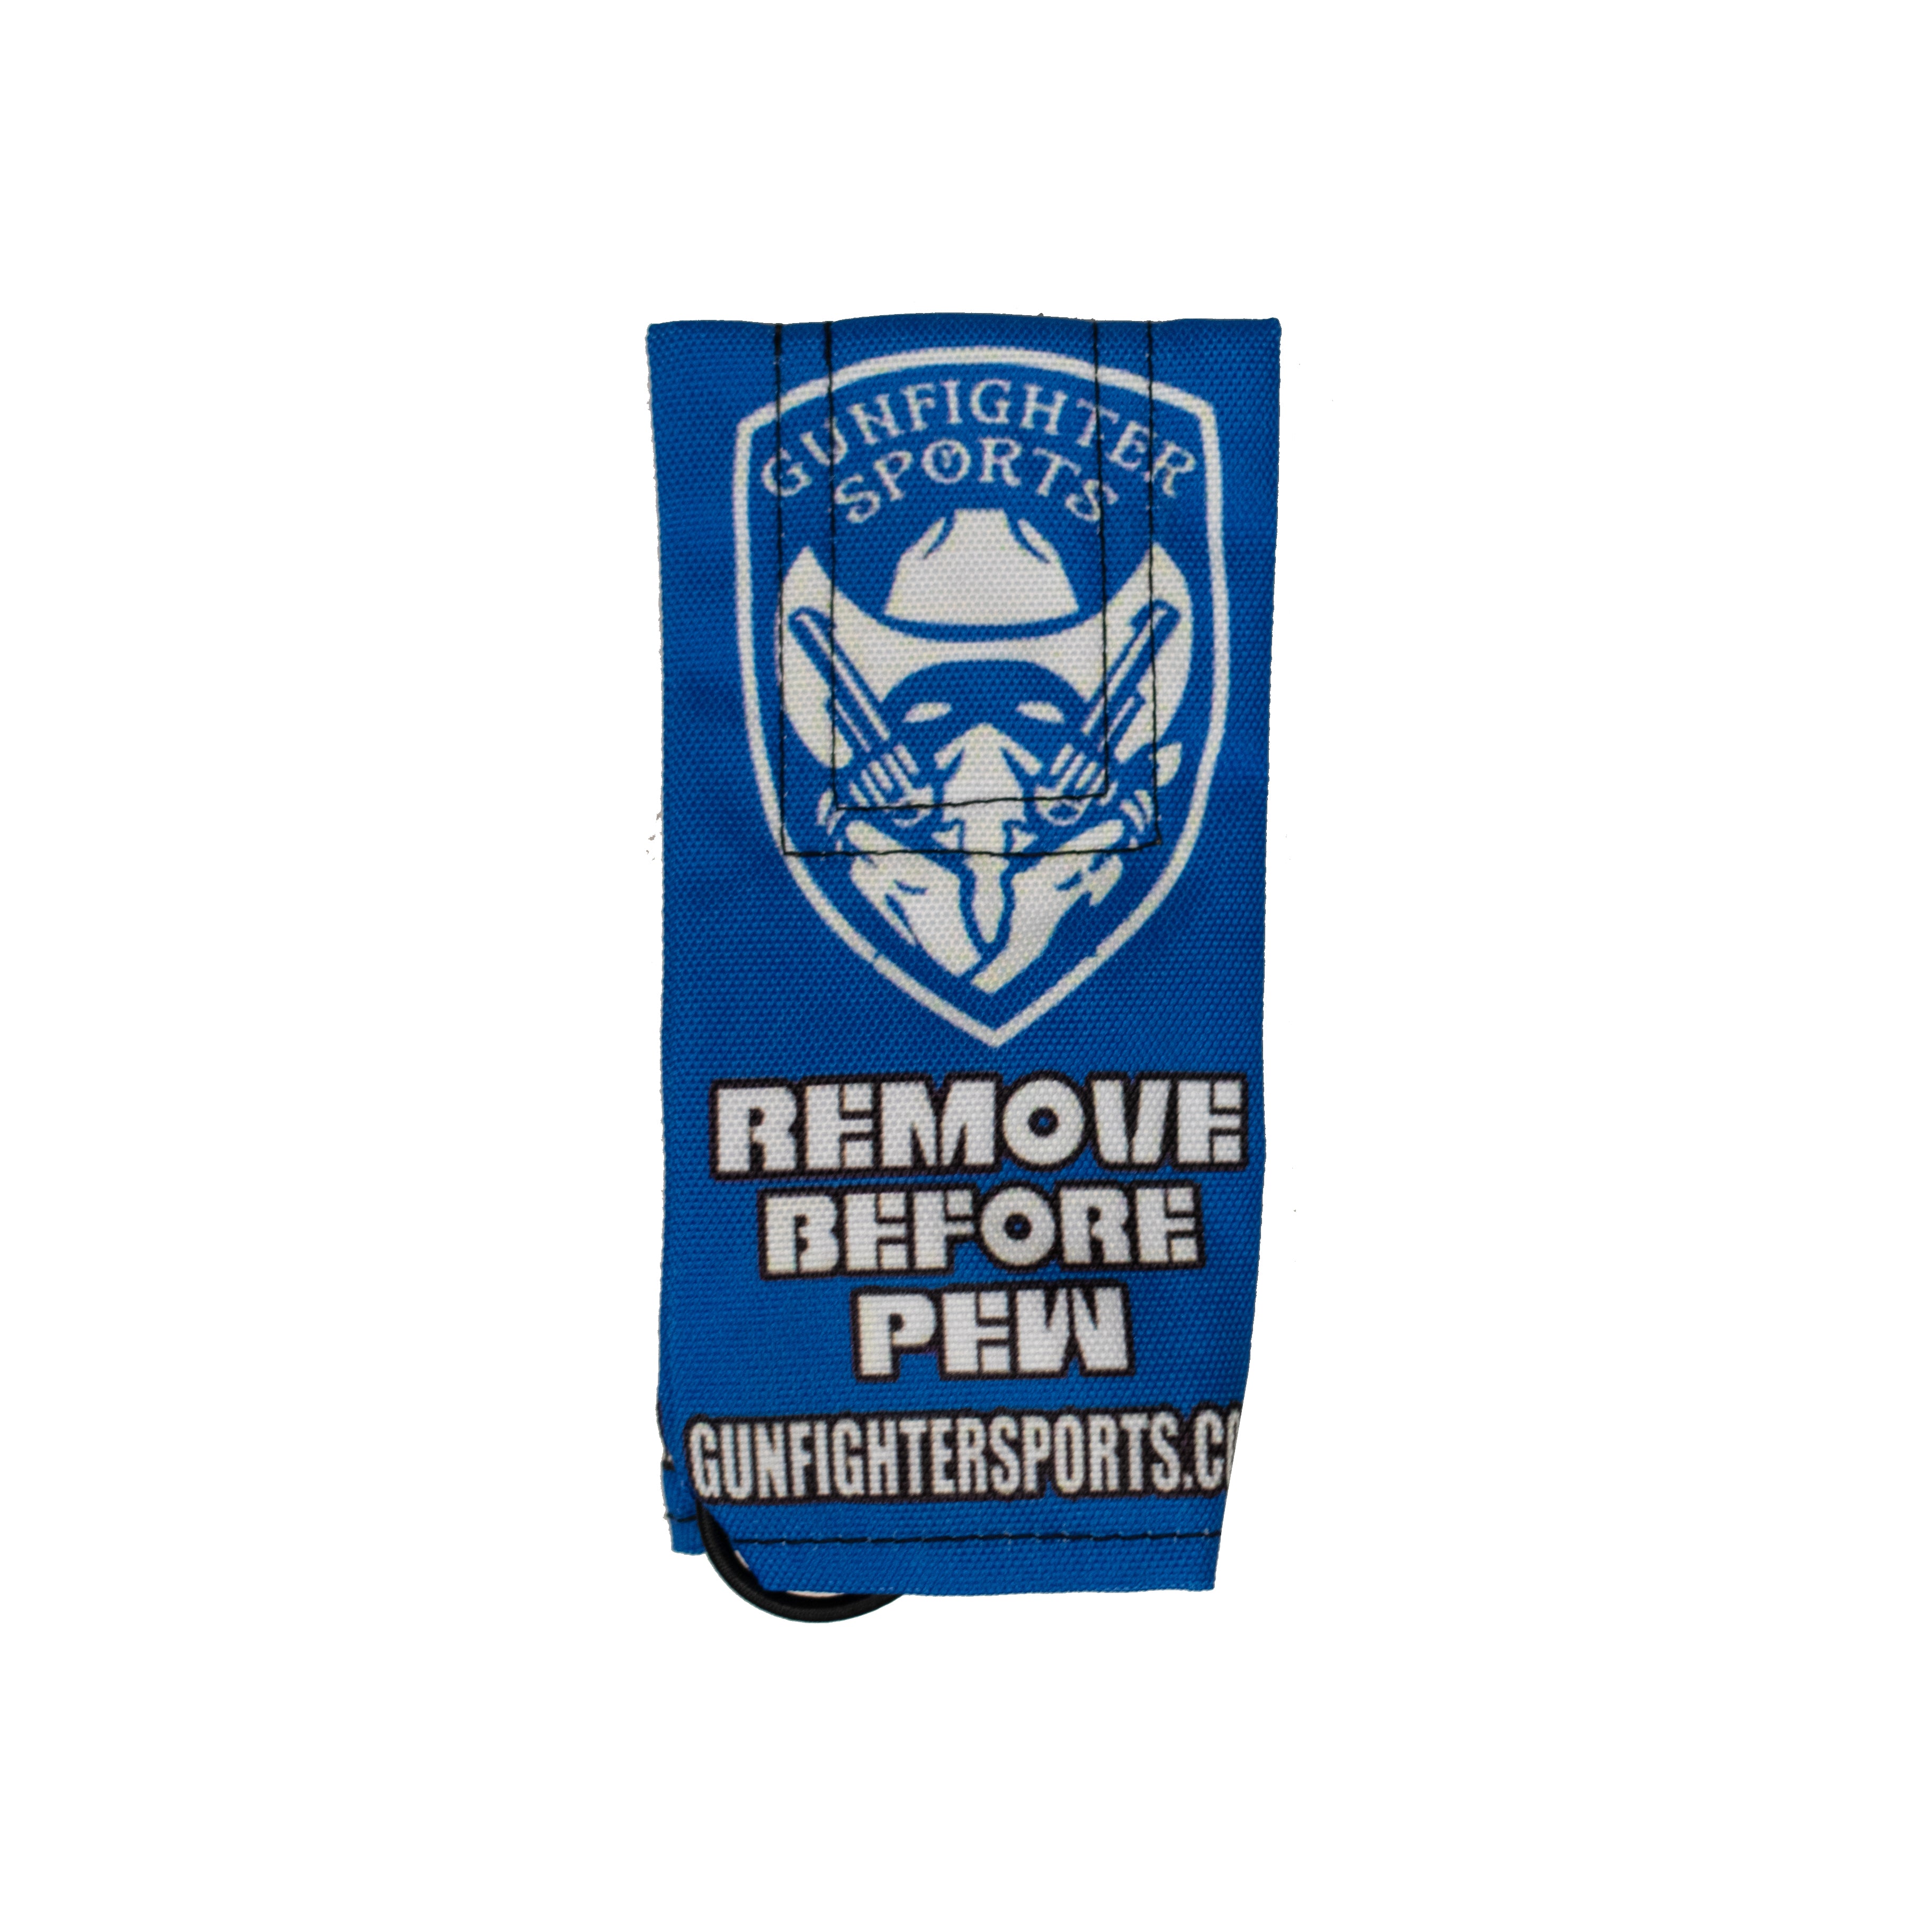 Barrel Cover "Remove Before Pew" - Blue